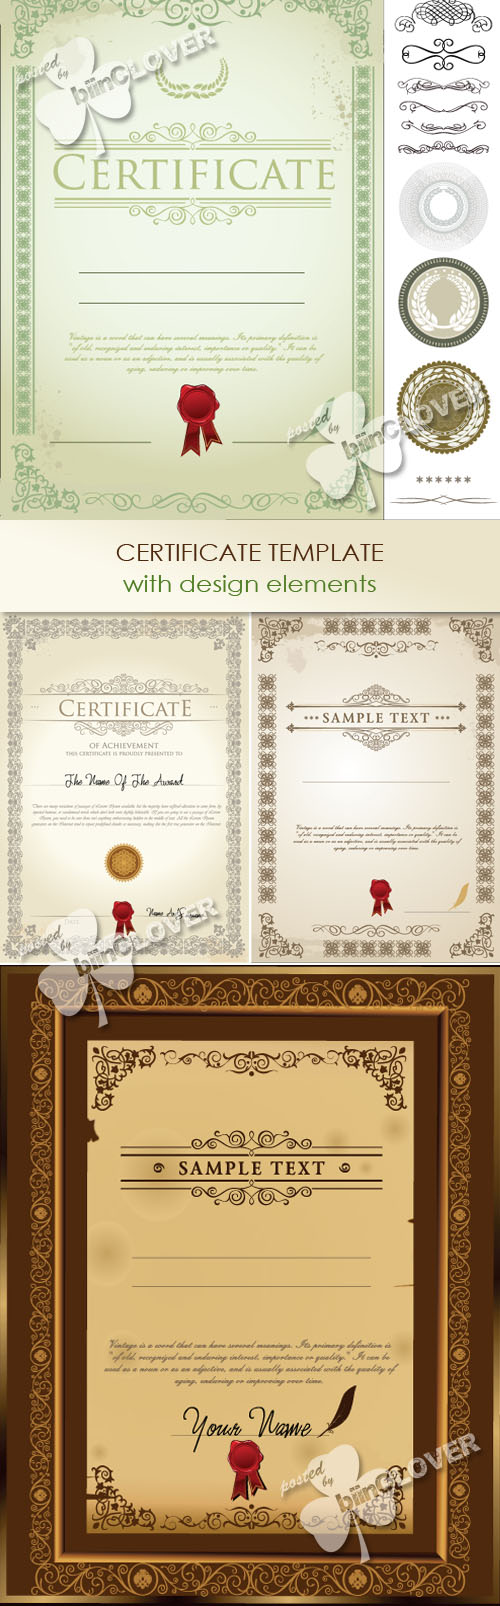 Certificate template with design elements 0222